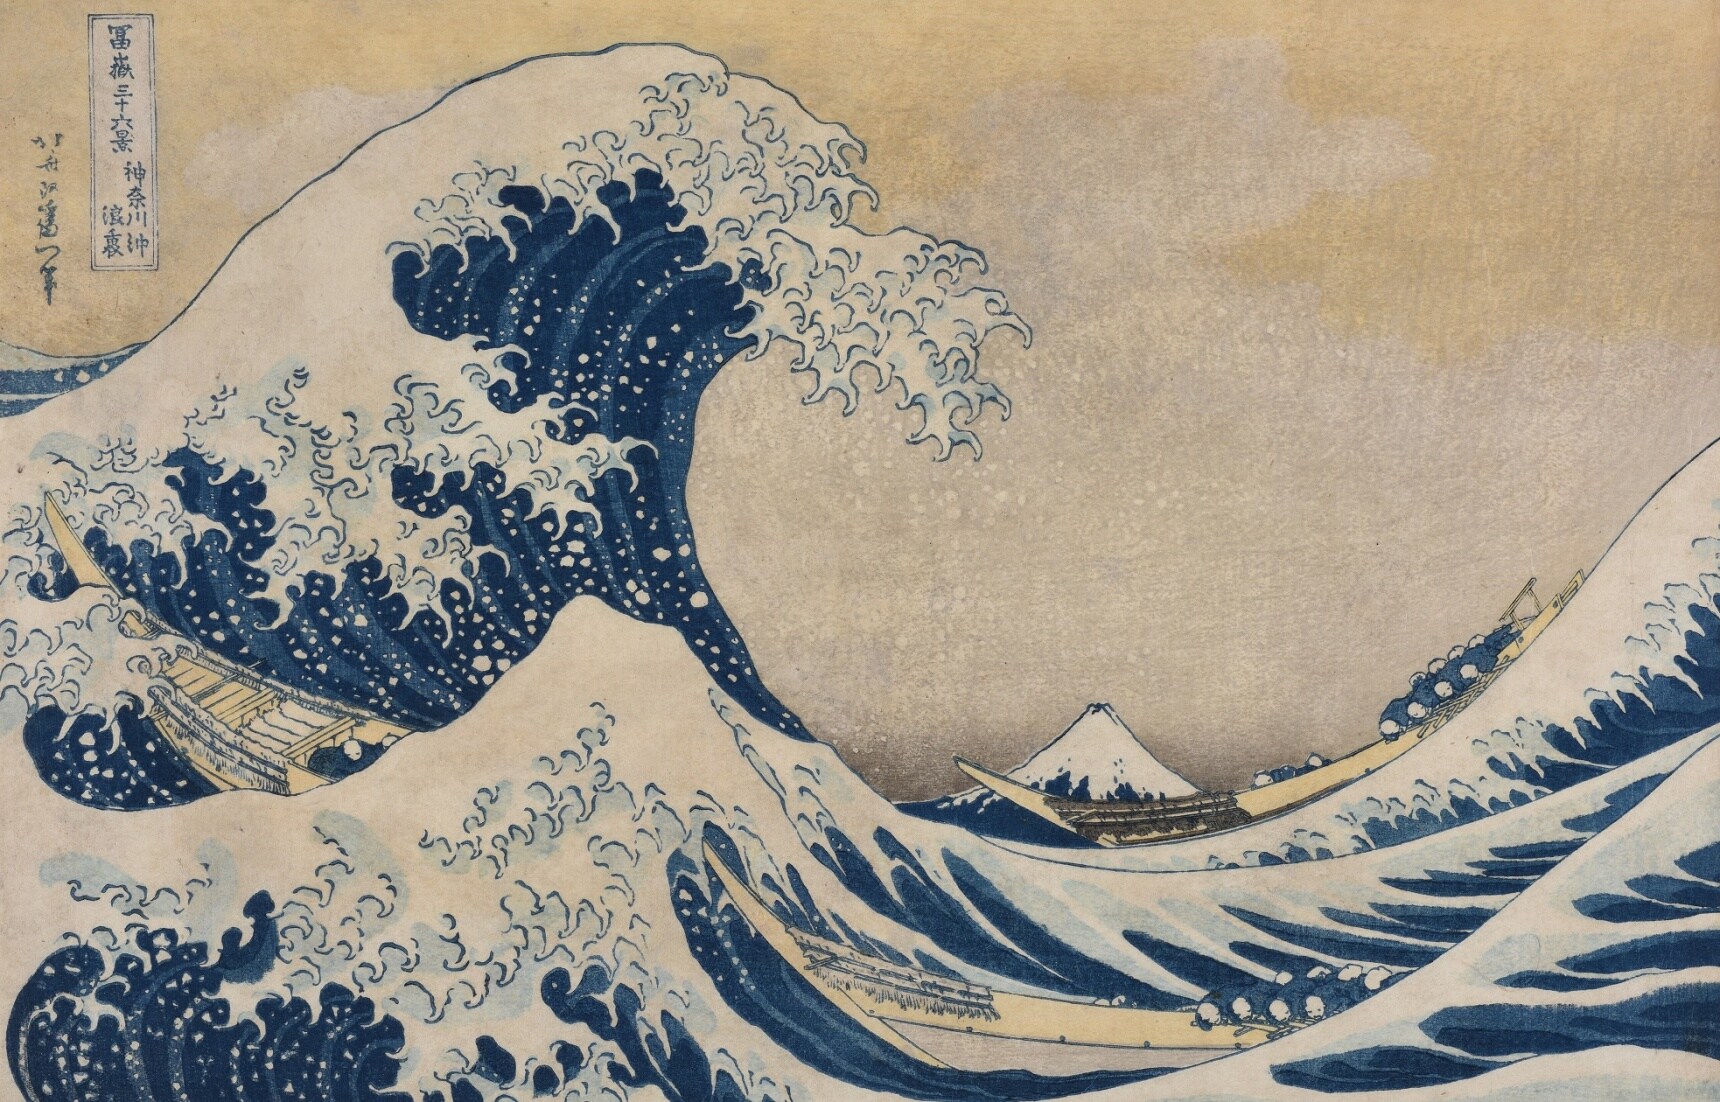 The Life of Hokusai, As Seen in the Collection of a Remarkable Museum